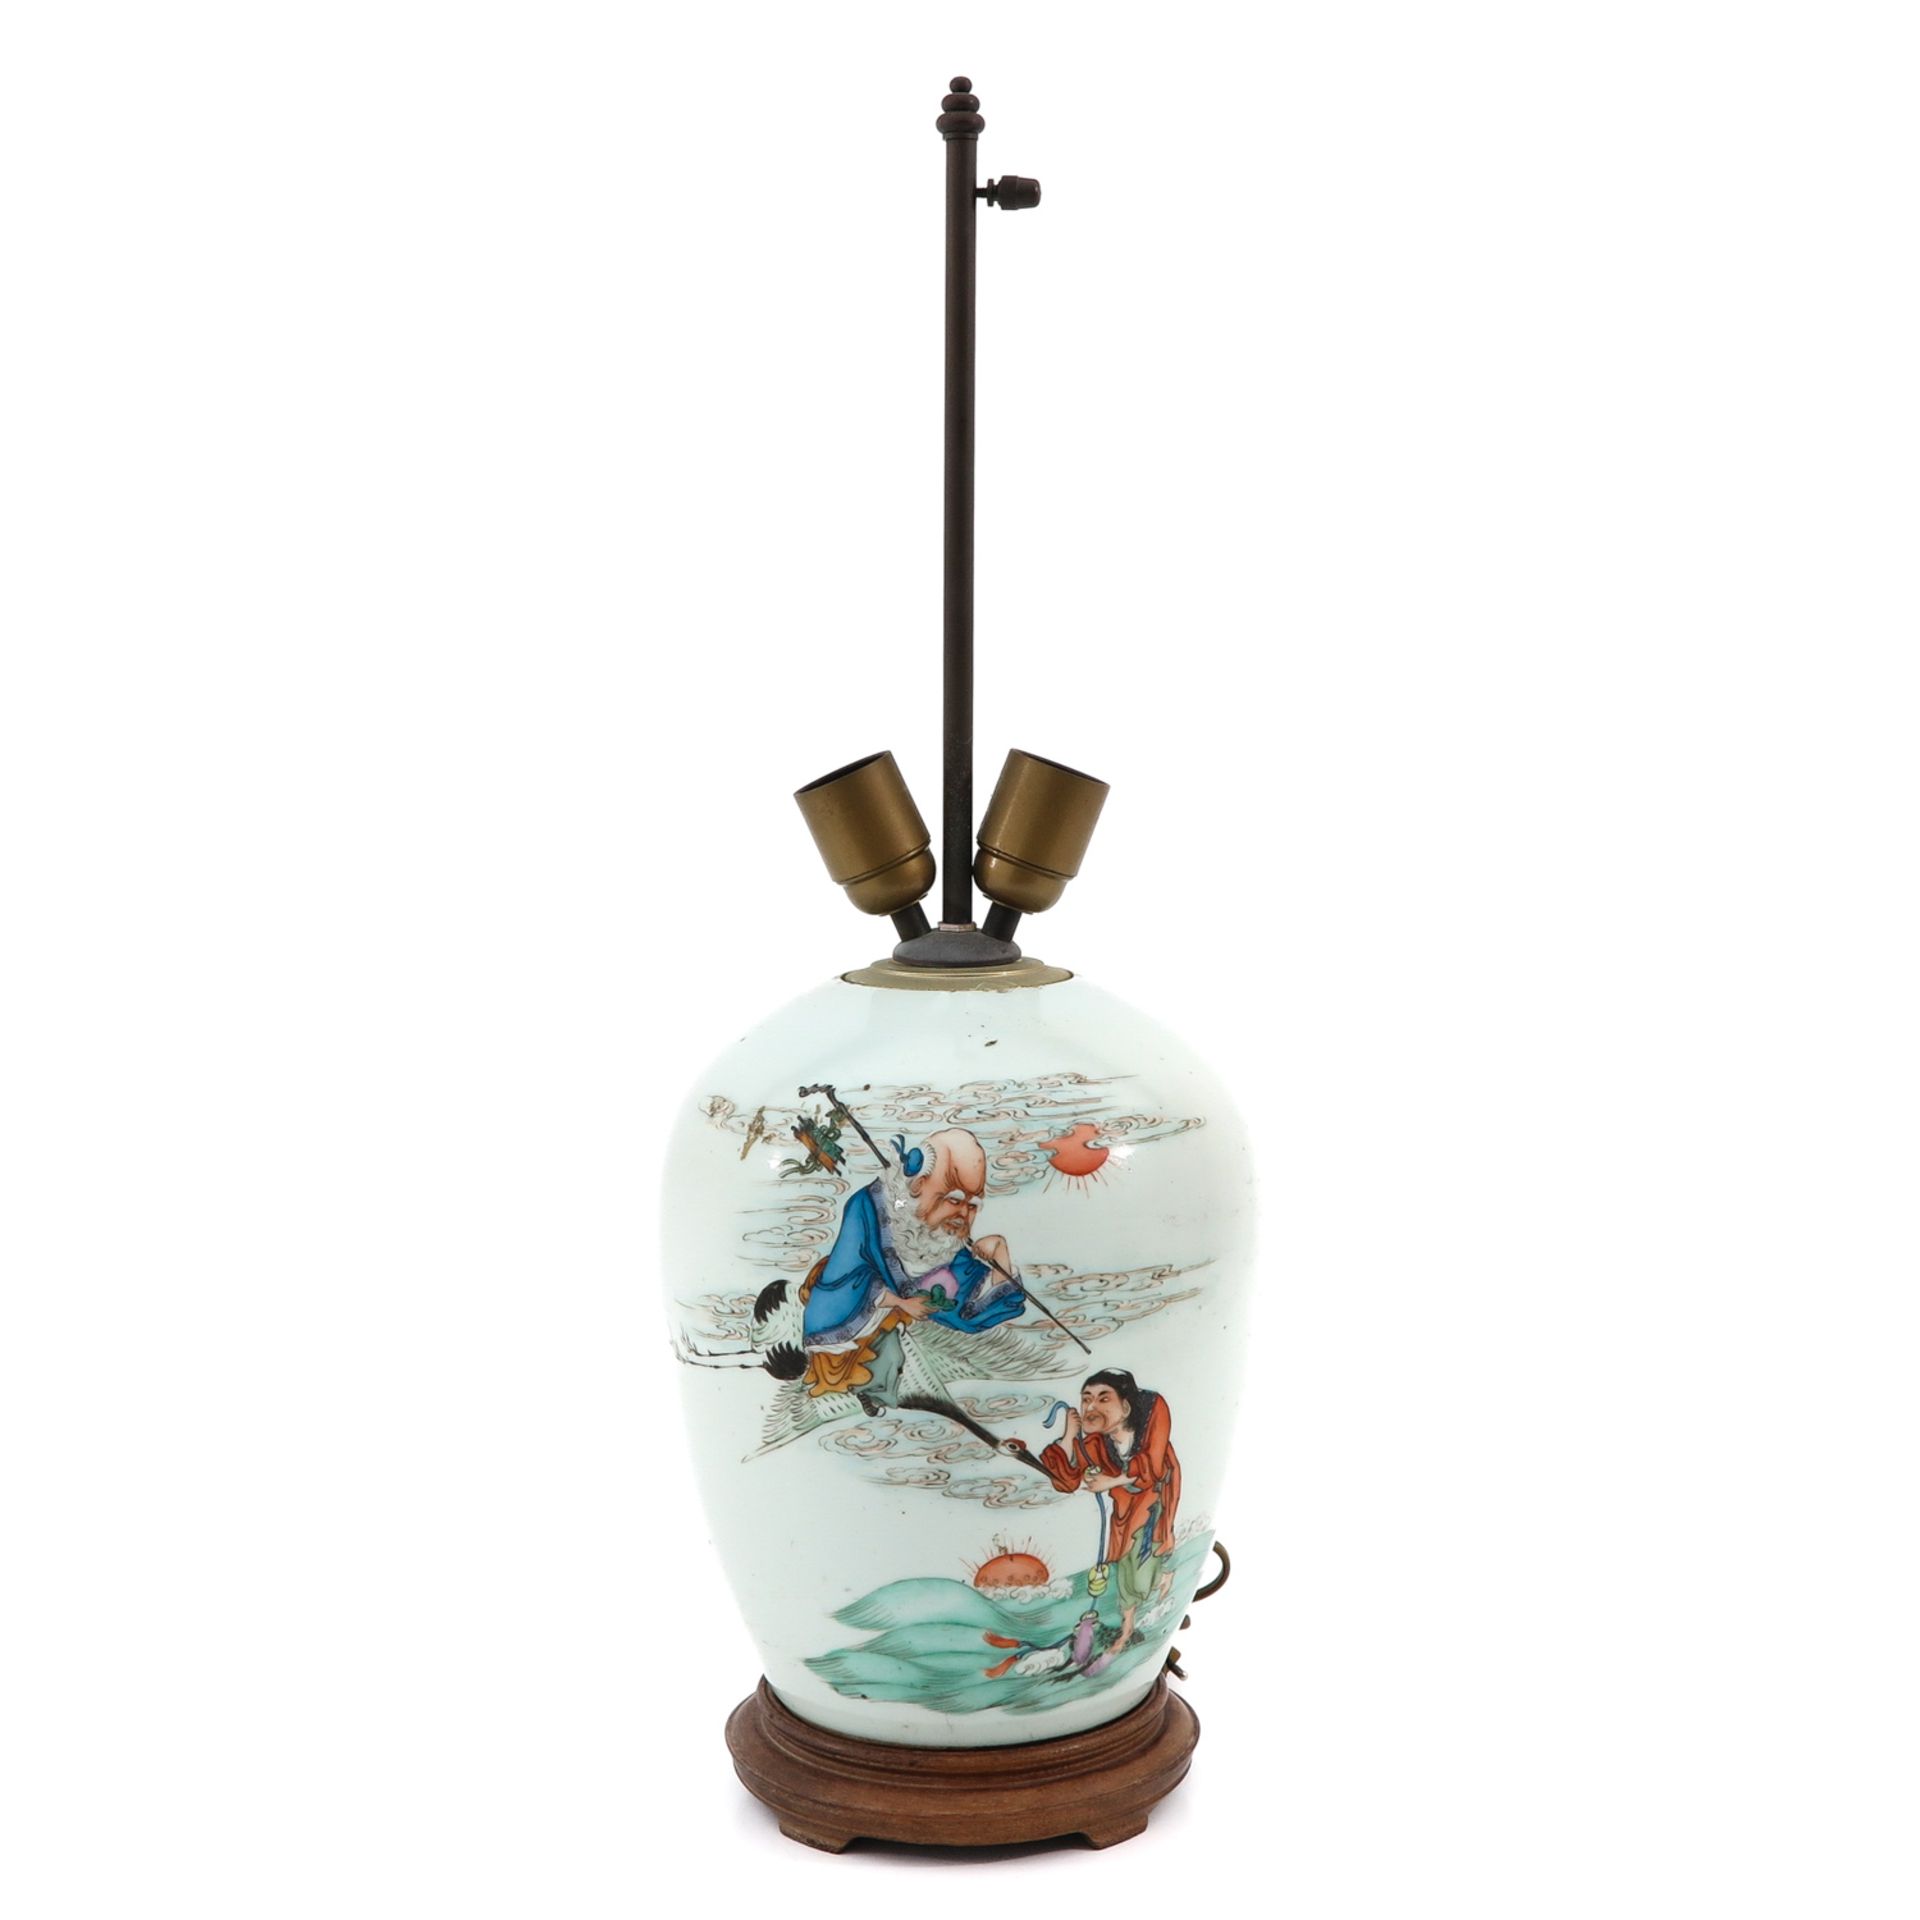 A Polychrome Decor Chinese Lamp